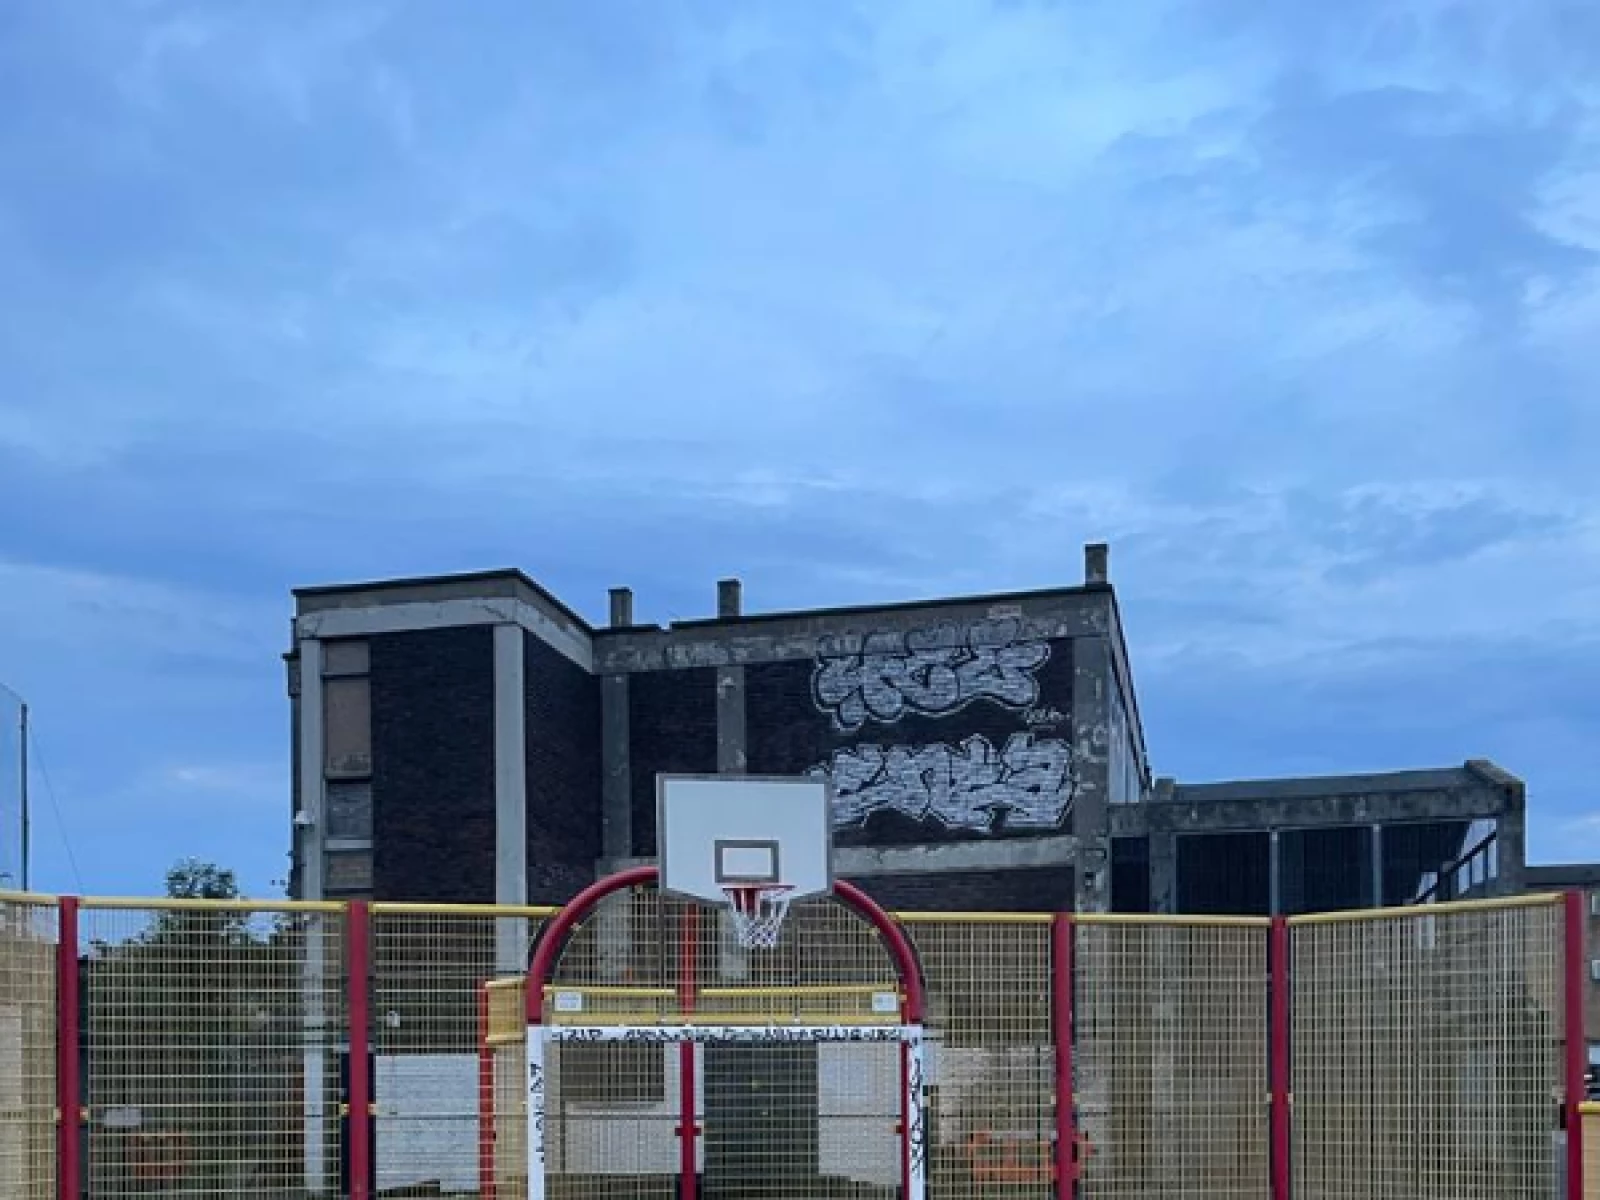 London Basketball Court: West Hampstead Concrete Park Courts of the World